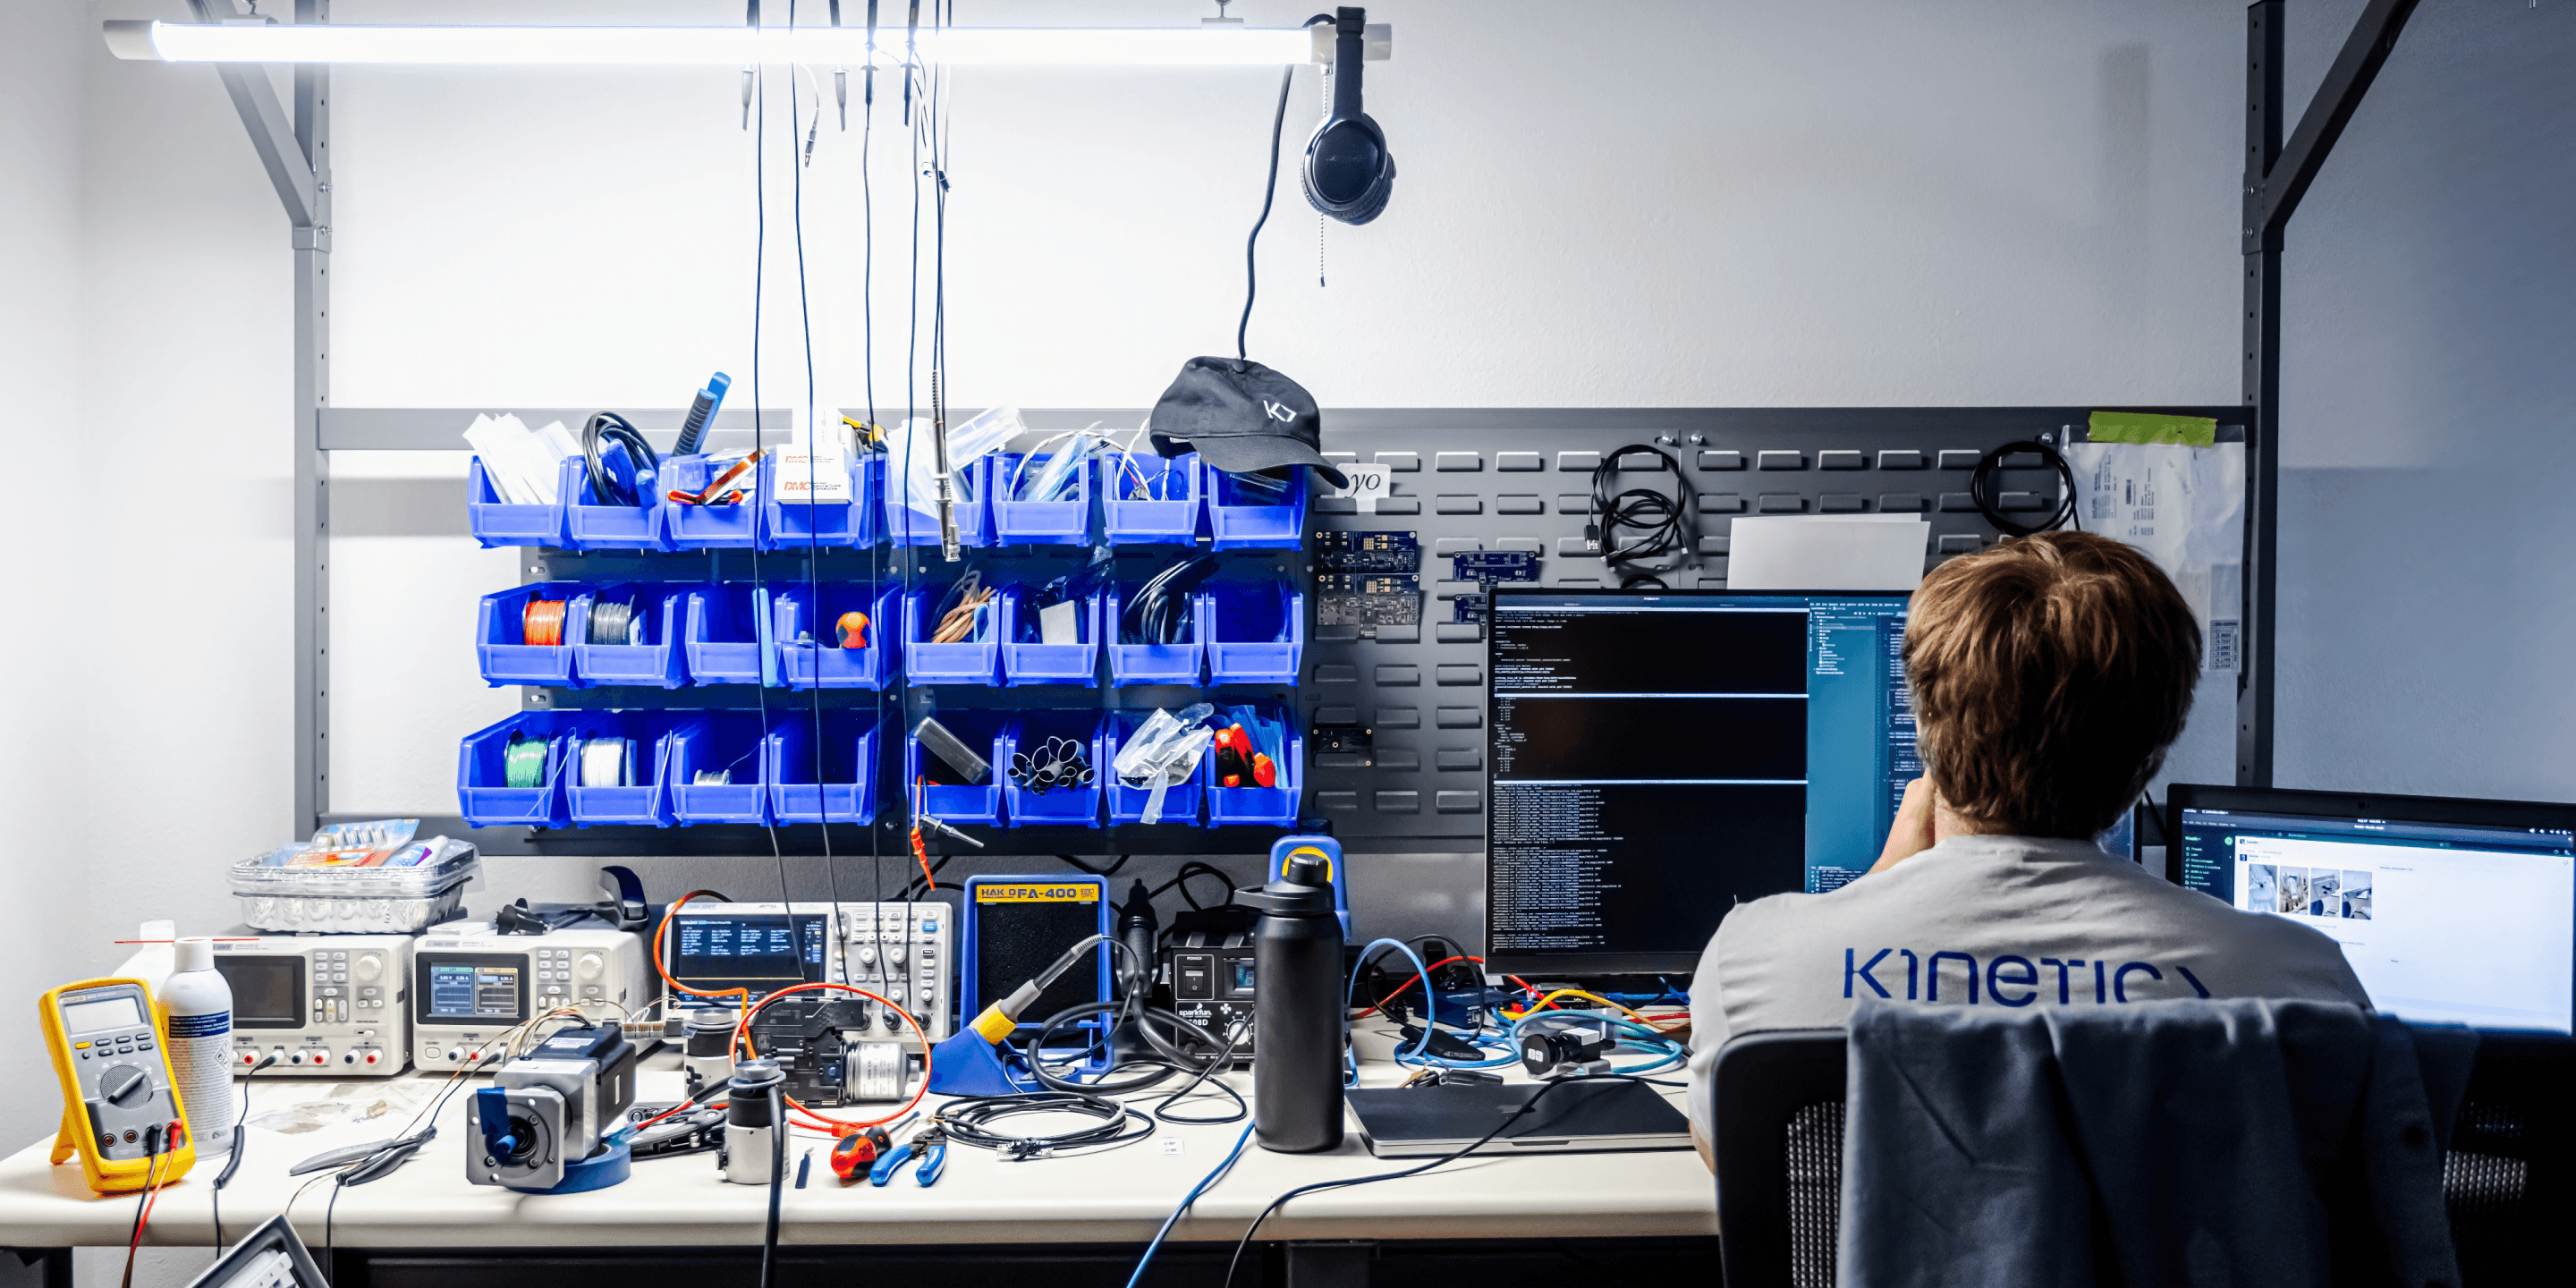 Kinetic CTO and Co-founder Sander Marques sits at a desk in the company’s headquarters. His back is turned to the camera. In the foreground is a wall filled with various electronic hardware components.